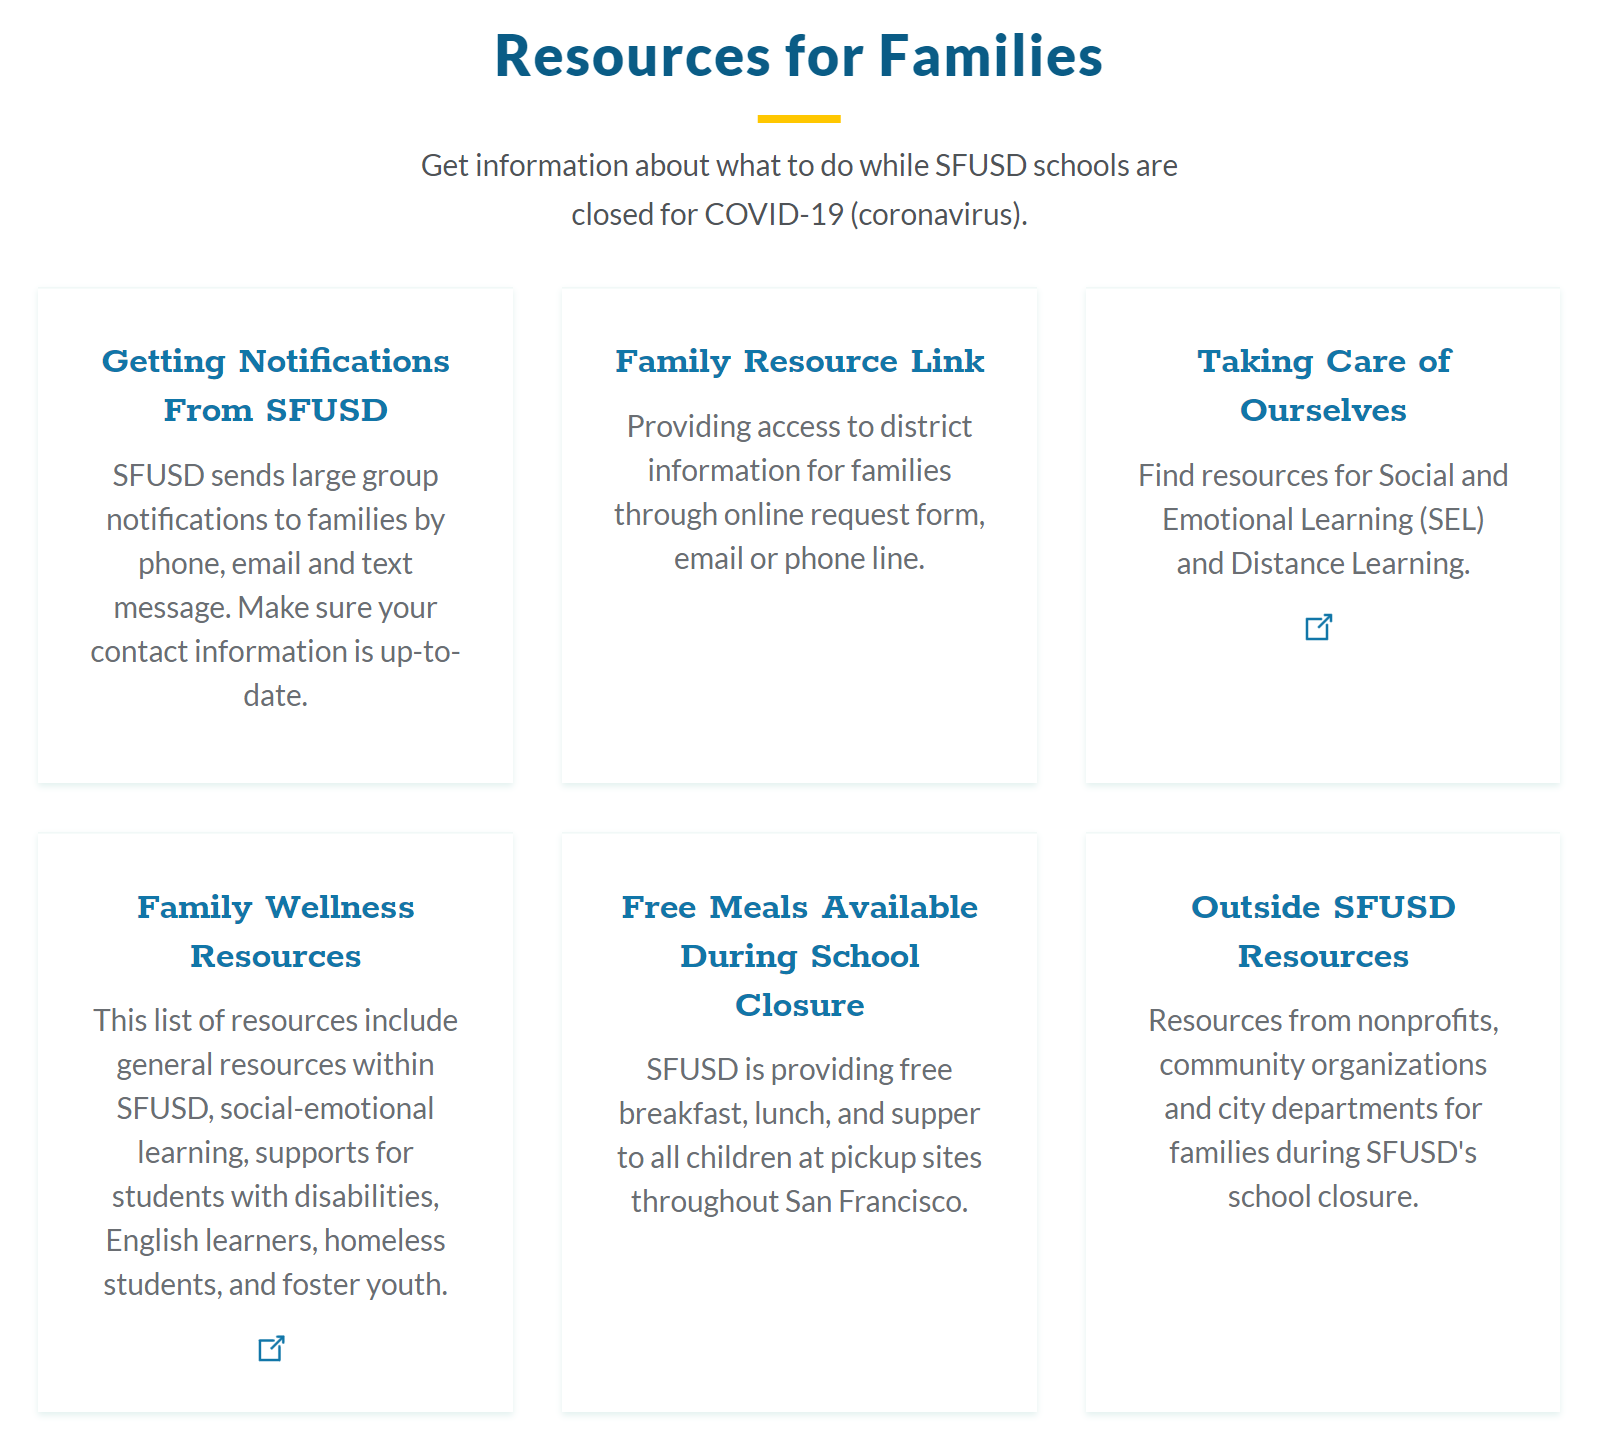 The San Francisco Unified School District provides a list of resources with links clearly-marked as external, both visually and for screen readers.